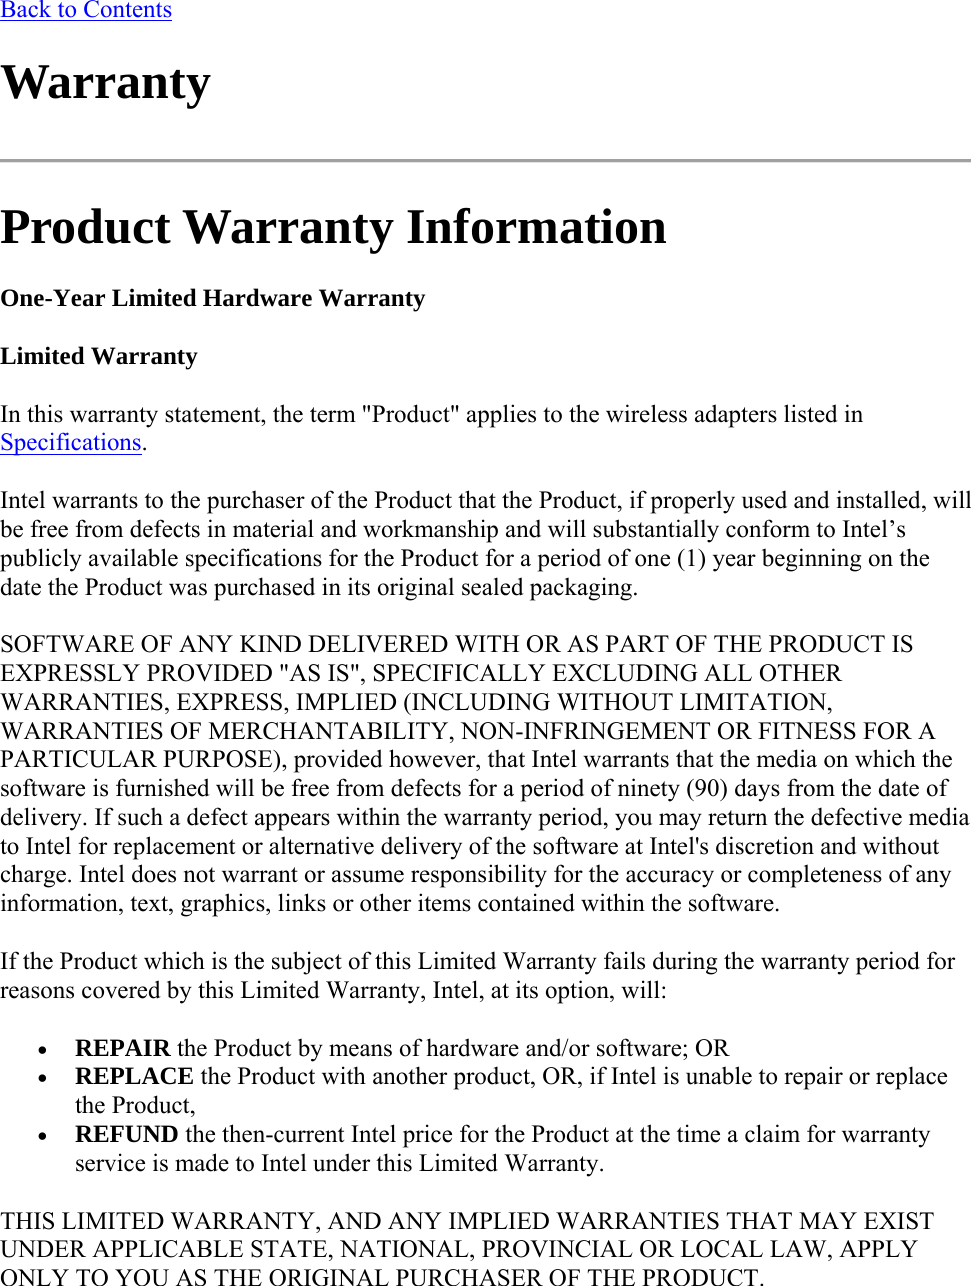 Back to Contents Warranty  Product Warranty Information One-Year Limited Hardware Warranty Limited Warranty In this warranty statement, the term &quot;Product&quot; applies to the wireless adapters listed in Specifications. Intel warrants to the purchaser of the Product that the Product, if properly used and installed, will be free from defects in material and workmanship and will substantially conform to Intel’s publicly available specifications for the Product for a period of one (1) year beginning on the date the Product was purchased in its original sealed packaging. SOFTWARE OF ANY KIND DELIVERED WITH OR AS PART OF THE PRODUCT IS EXPRESSLY PROVIDED &quot;AS IS&quot;, SPECIFICALLY EXCLUDING ALL OTHER WARRANTIES, EXPRESS, IMPLIED (INCLUDING WITHOUT LIMITATION, WARRANTIES OF MERCHANTABILITY, NON-INFRINGEMENT OR FITNESS FOR A PARTICULAR PURPOSE), provided however, that Intel warrants that the media on which the software is furnished will be free from defects for a period of ninety (90) days from the date of delivery. If such a defect appears within the warranty period, you may return the defective media to Intel for replacement or alternative delivery of the software at Intel&apos;s discretion and without charge. Intel does not warrant or assume responsibility for the accuracy or completeness of any information, text, graphics, links or other items contained within the software. If the Product which is the subject of this Limited Warranty fails during the warranty period for reasons covered by this Limited Warranty, Intel, at its option, will:  REPAIR the Product by means of hardware and/or software; OR  REPLACE the Product with another product, OR, if Intel is unable to repair or replace the Product,  REFUND the then-current Intel price for the Product at the time a claim for warranty service is made to Intel under this Limited Warranty. THIS LIMITED WARRANTY, AND ANY IMPLIED WARRANTIES THAT MAY EXIST UNDER APPLICABLE STATE, NATIONAL, PROVINCIAL OR LOCAL LAW, APPLY ONLY TO YOU AS THE ORIGINAL PURCHASER OF THE PRODUCT. 